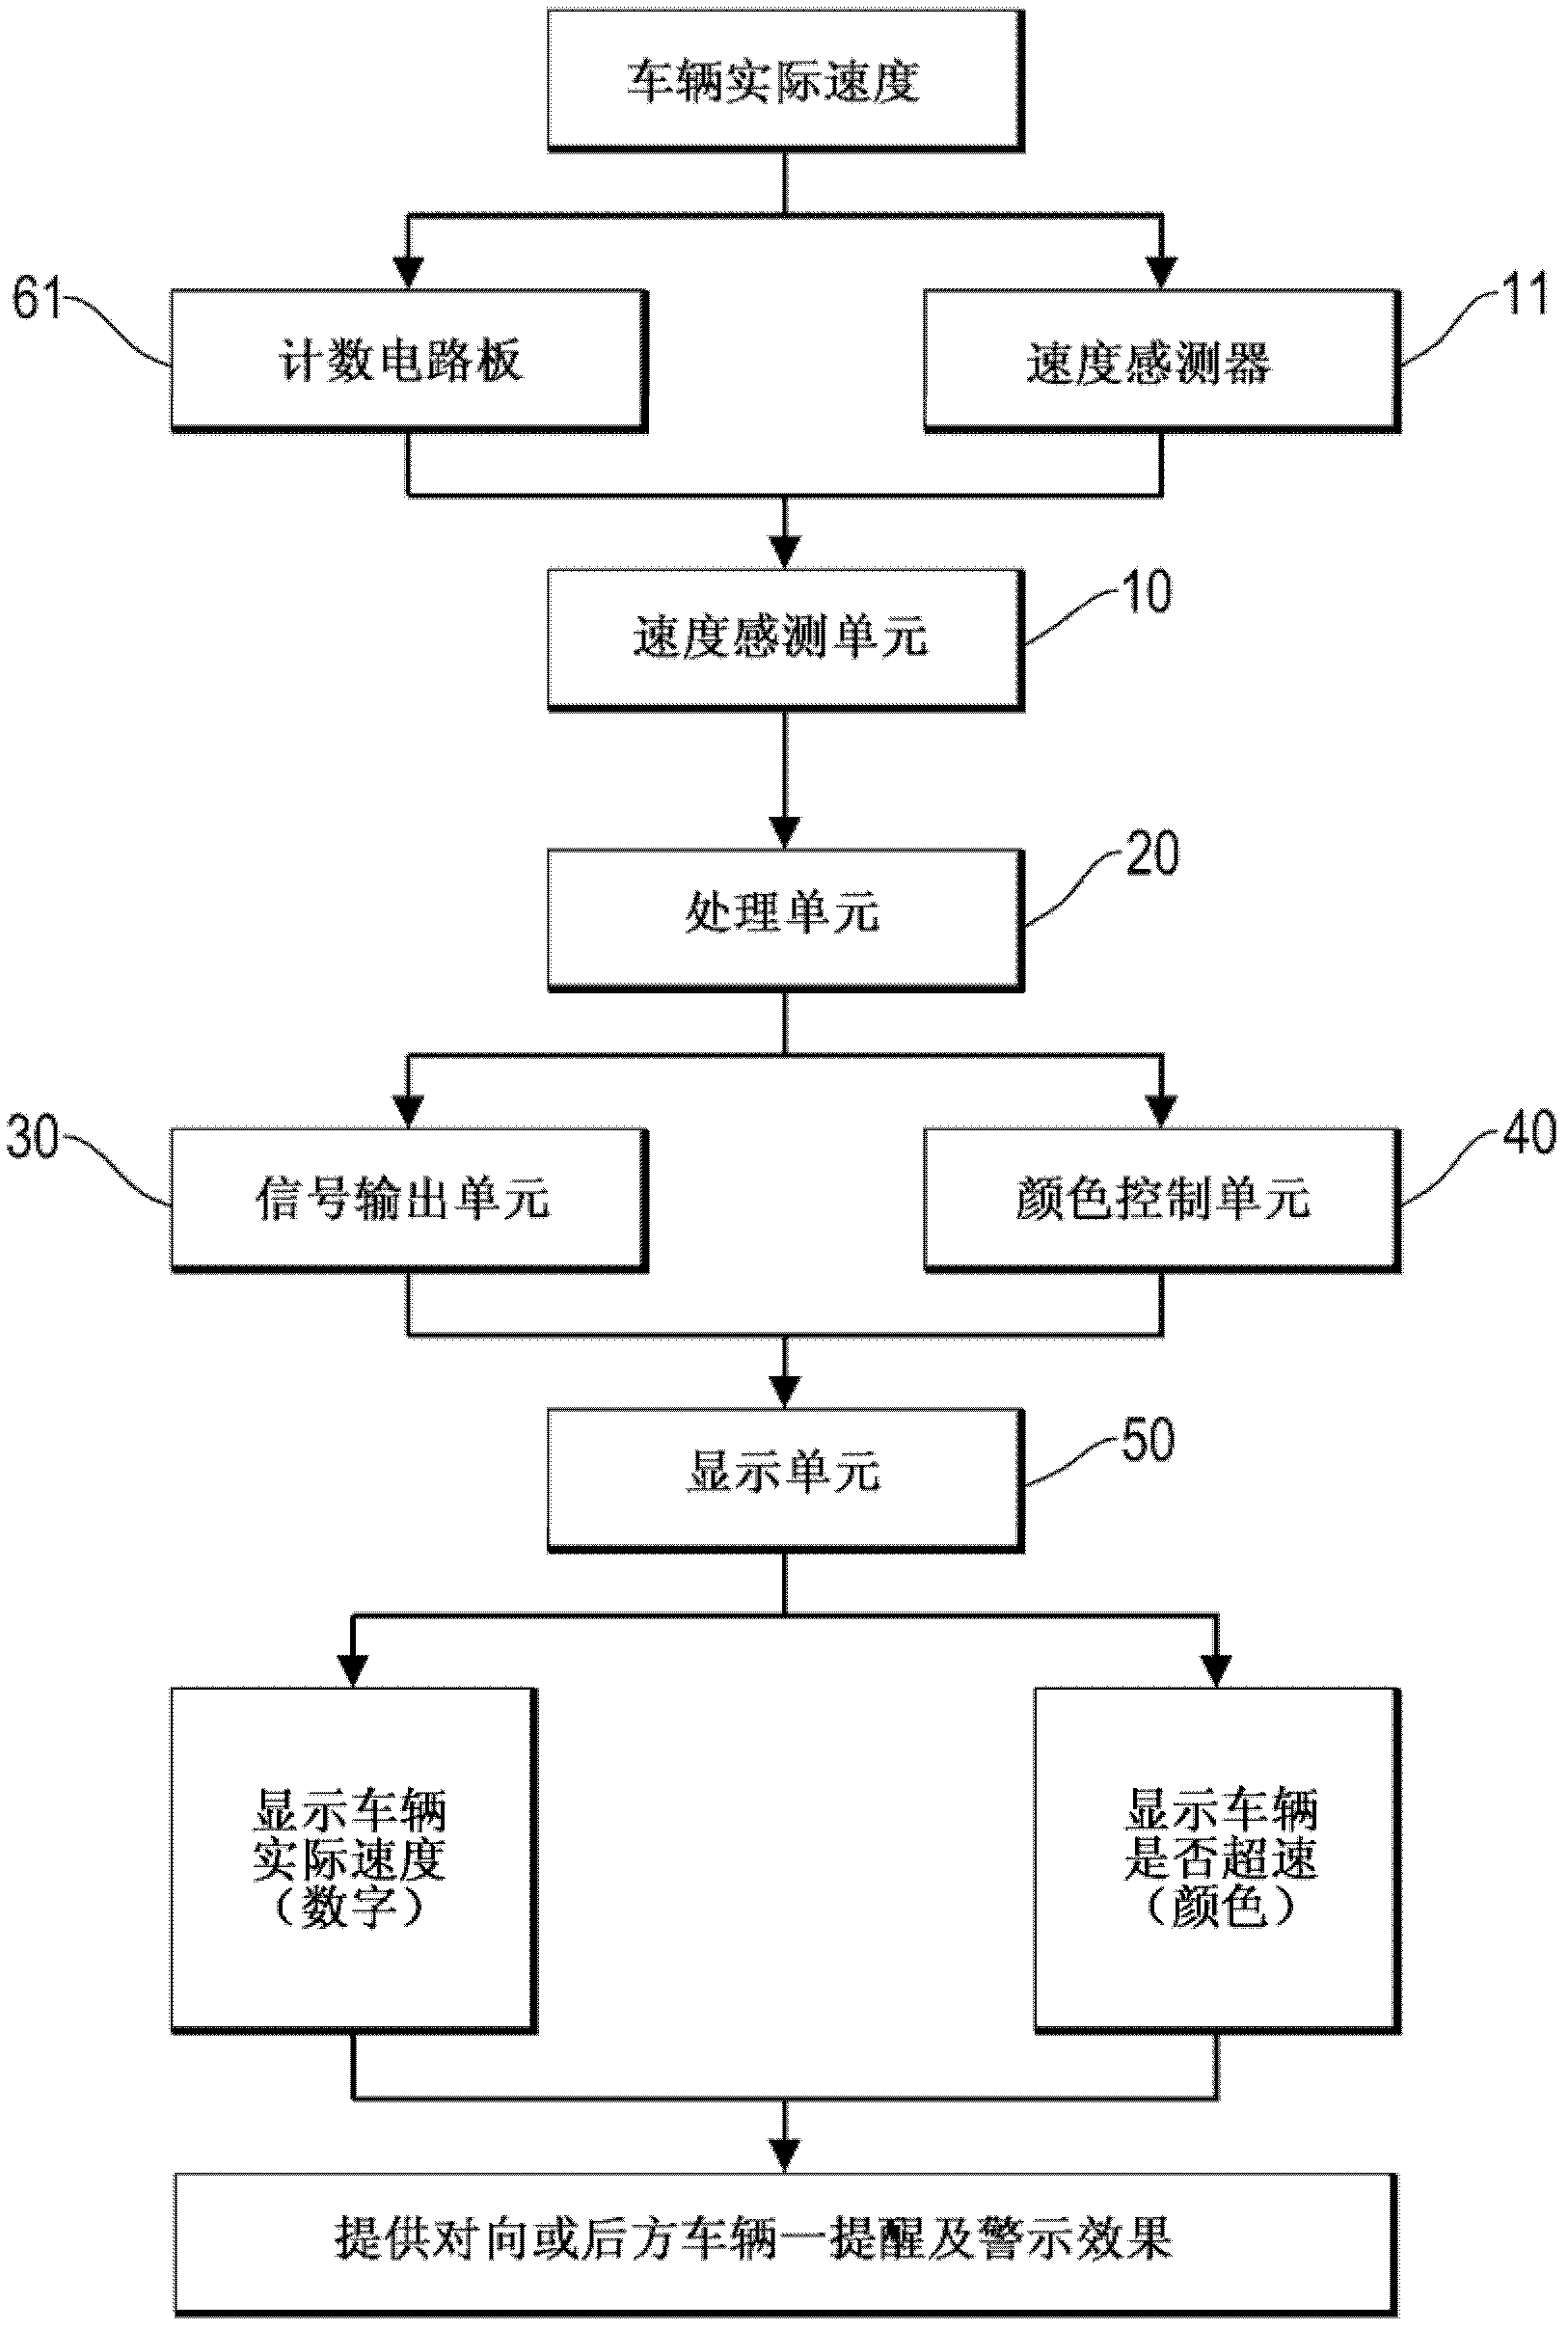 Vehicle speed safety display device